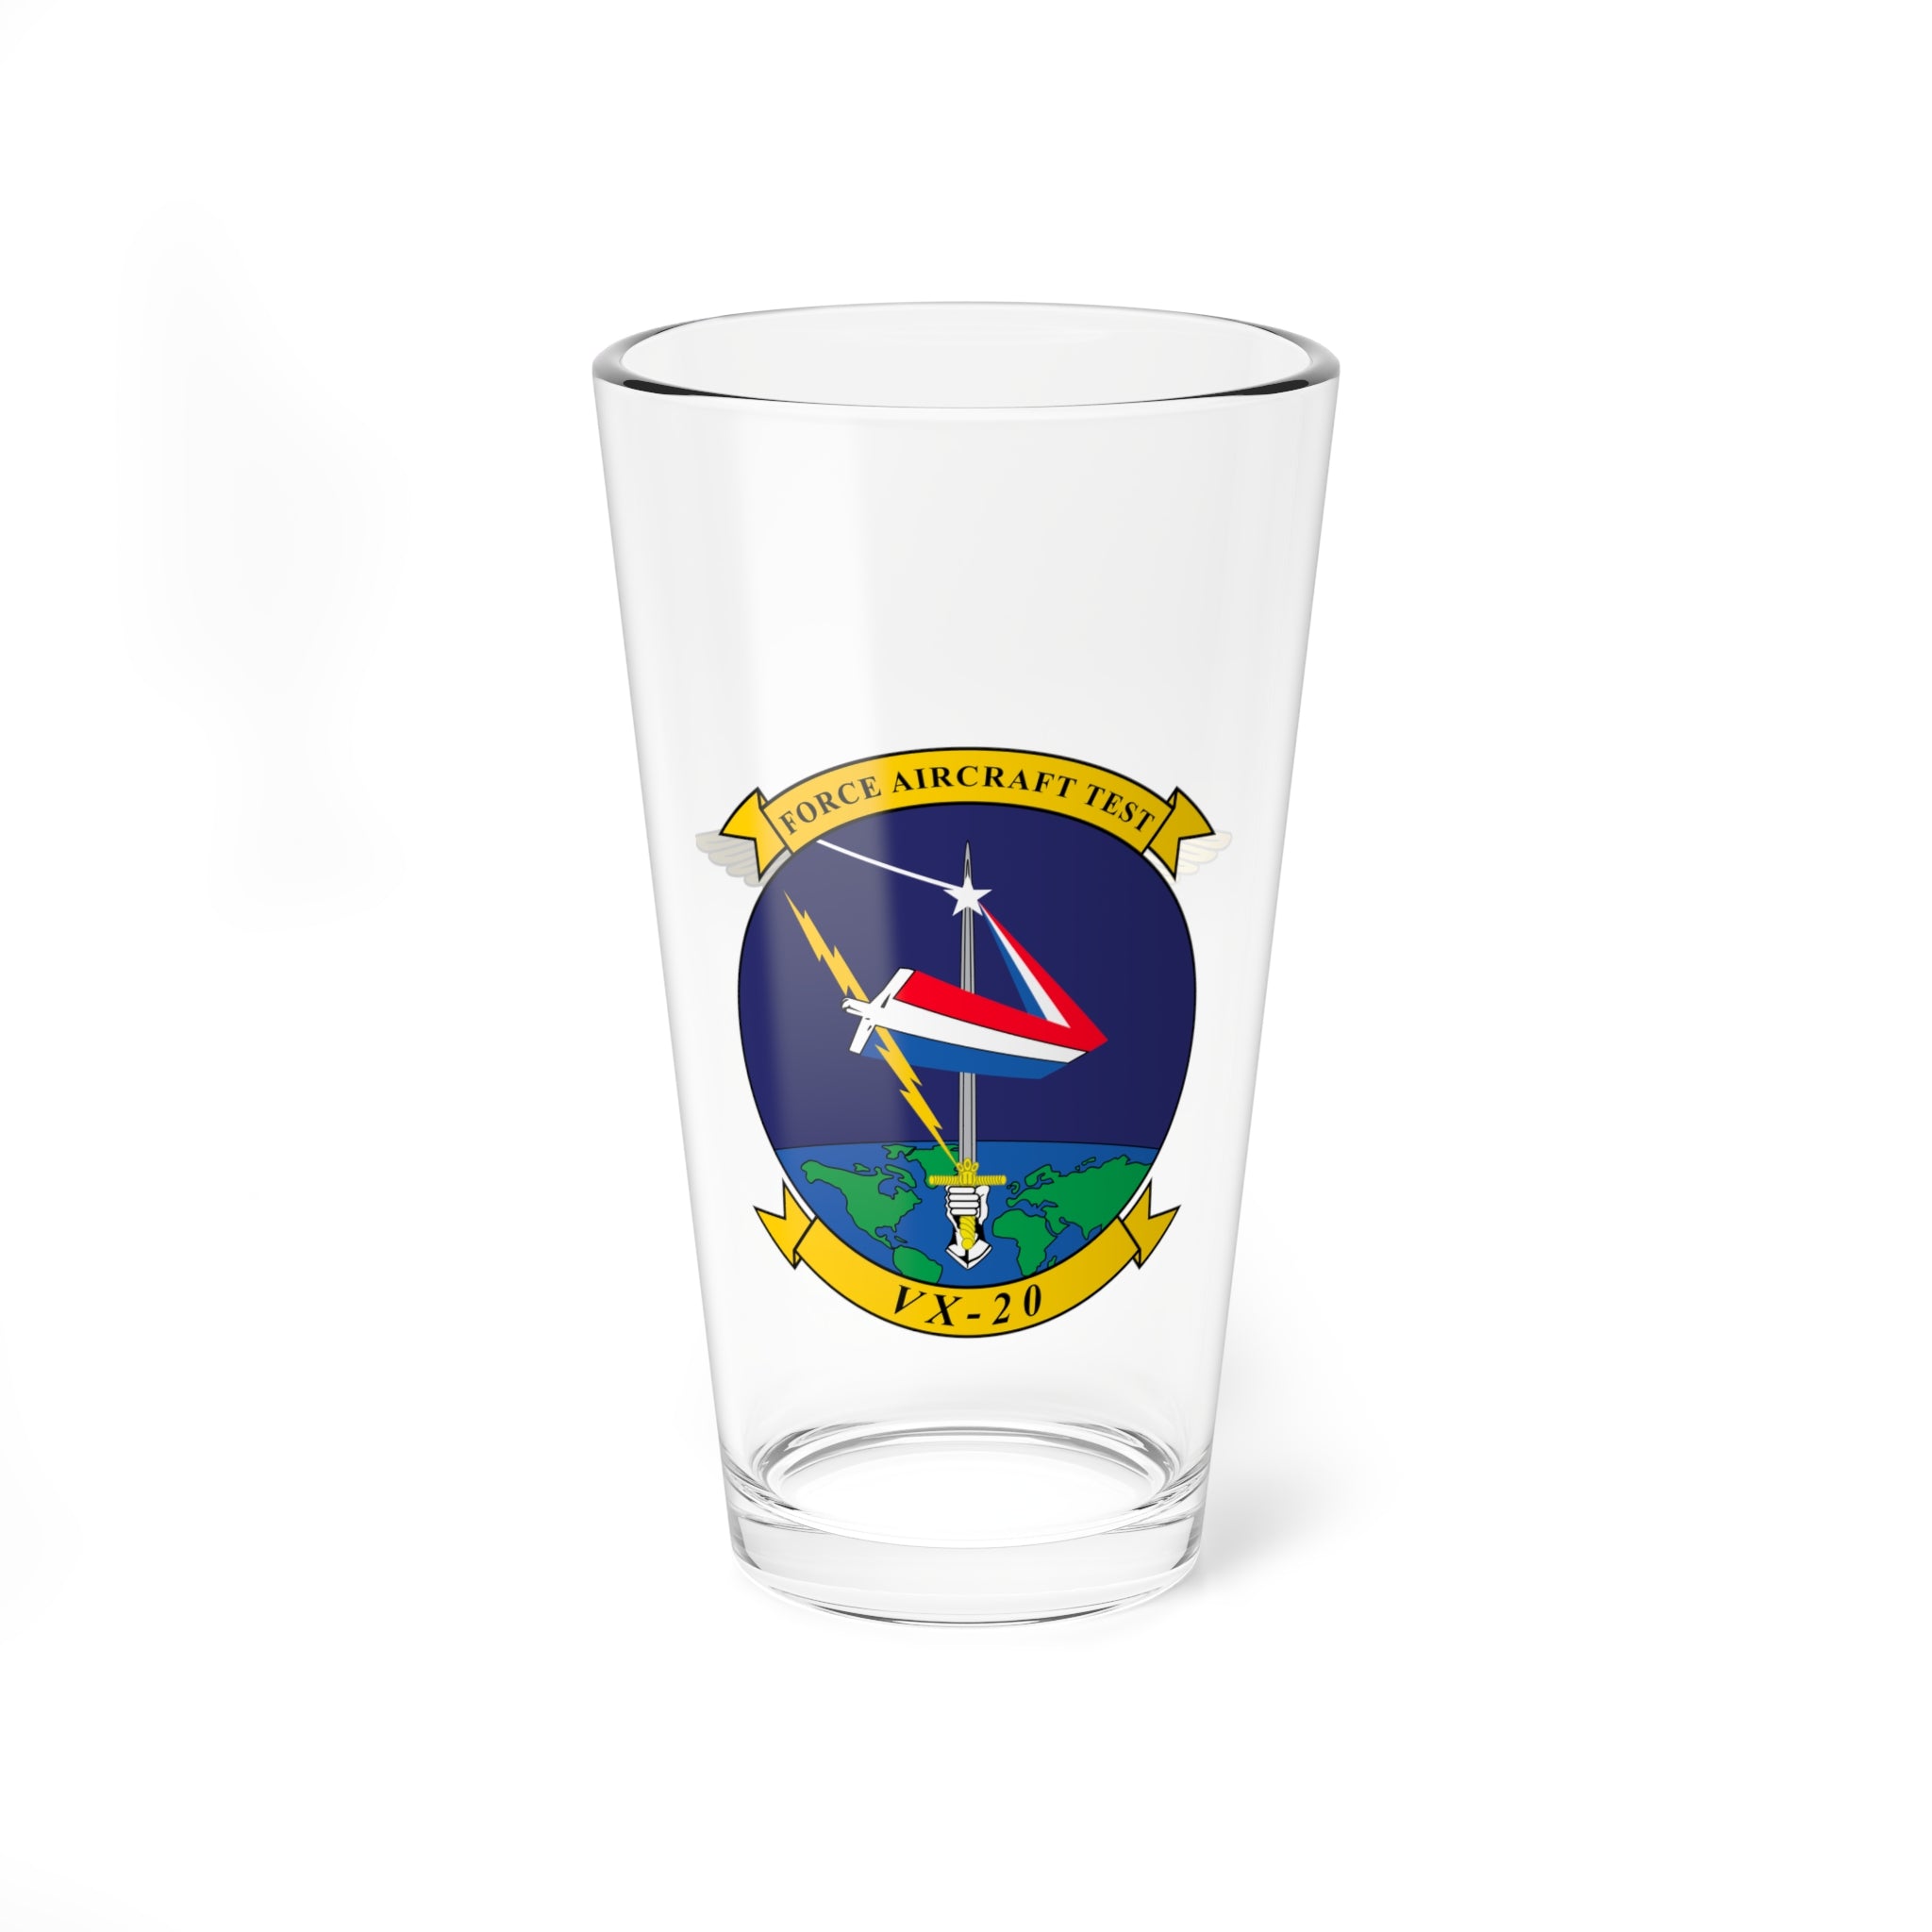 VX-20 "Force" NFO Pint Glass, 16oz, Navy Test and Evaluation Squadron flying Multiple Aircraft